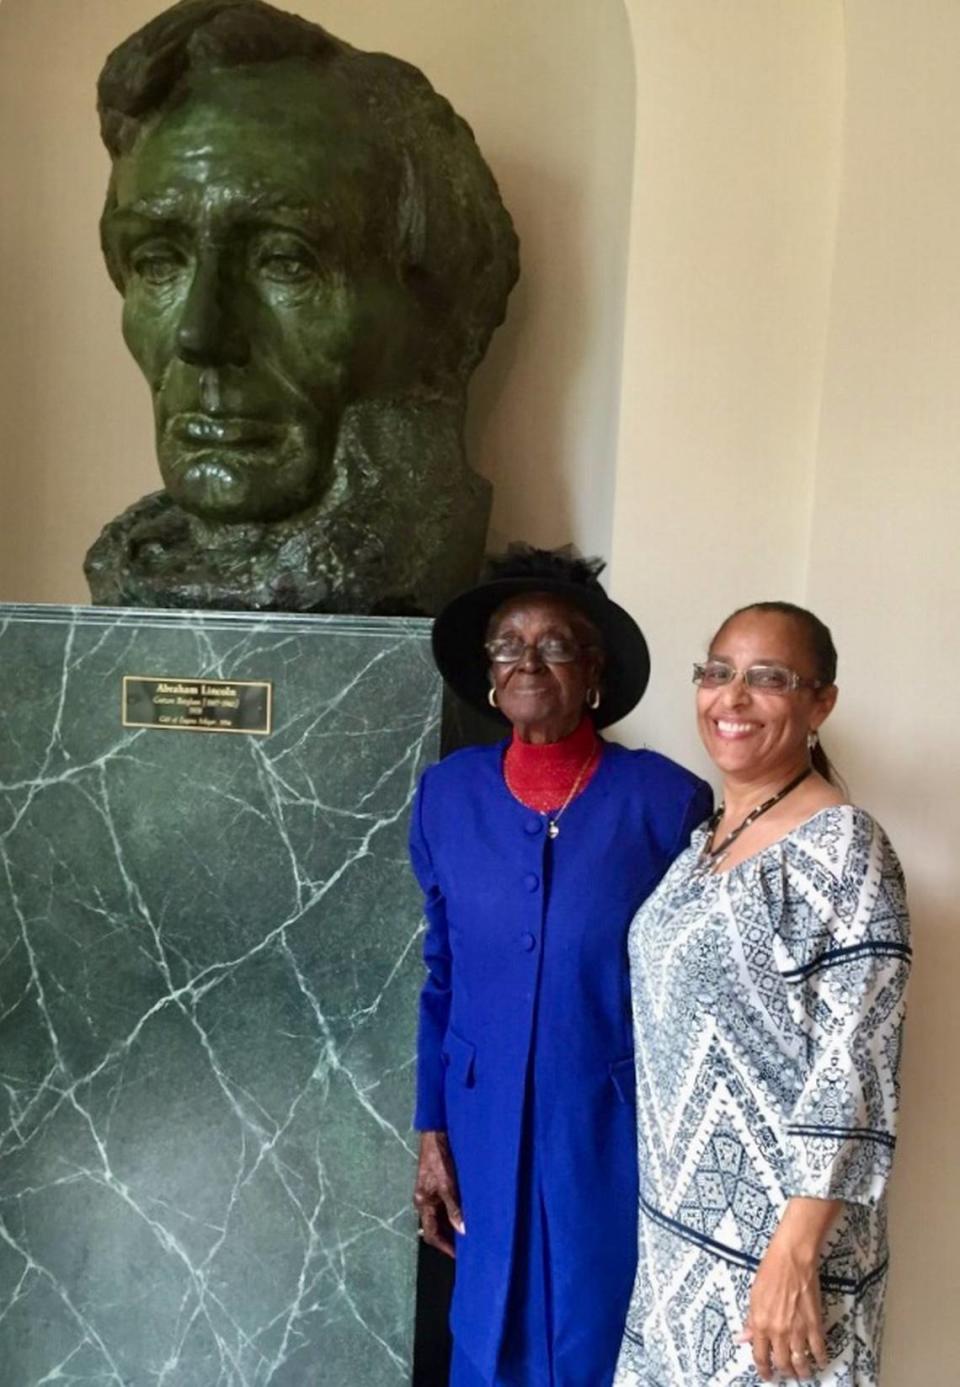 Ethel Rivers during a 2016 tour of the White House poses with her daughter-in-law, Barbara Rivers.